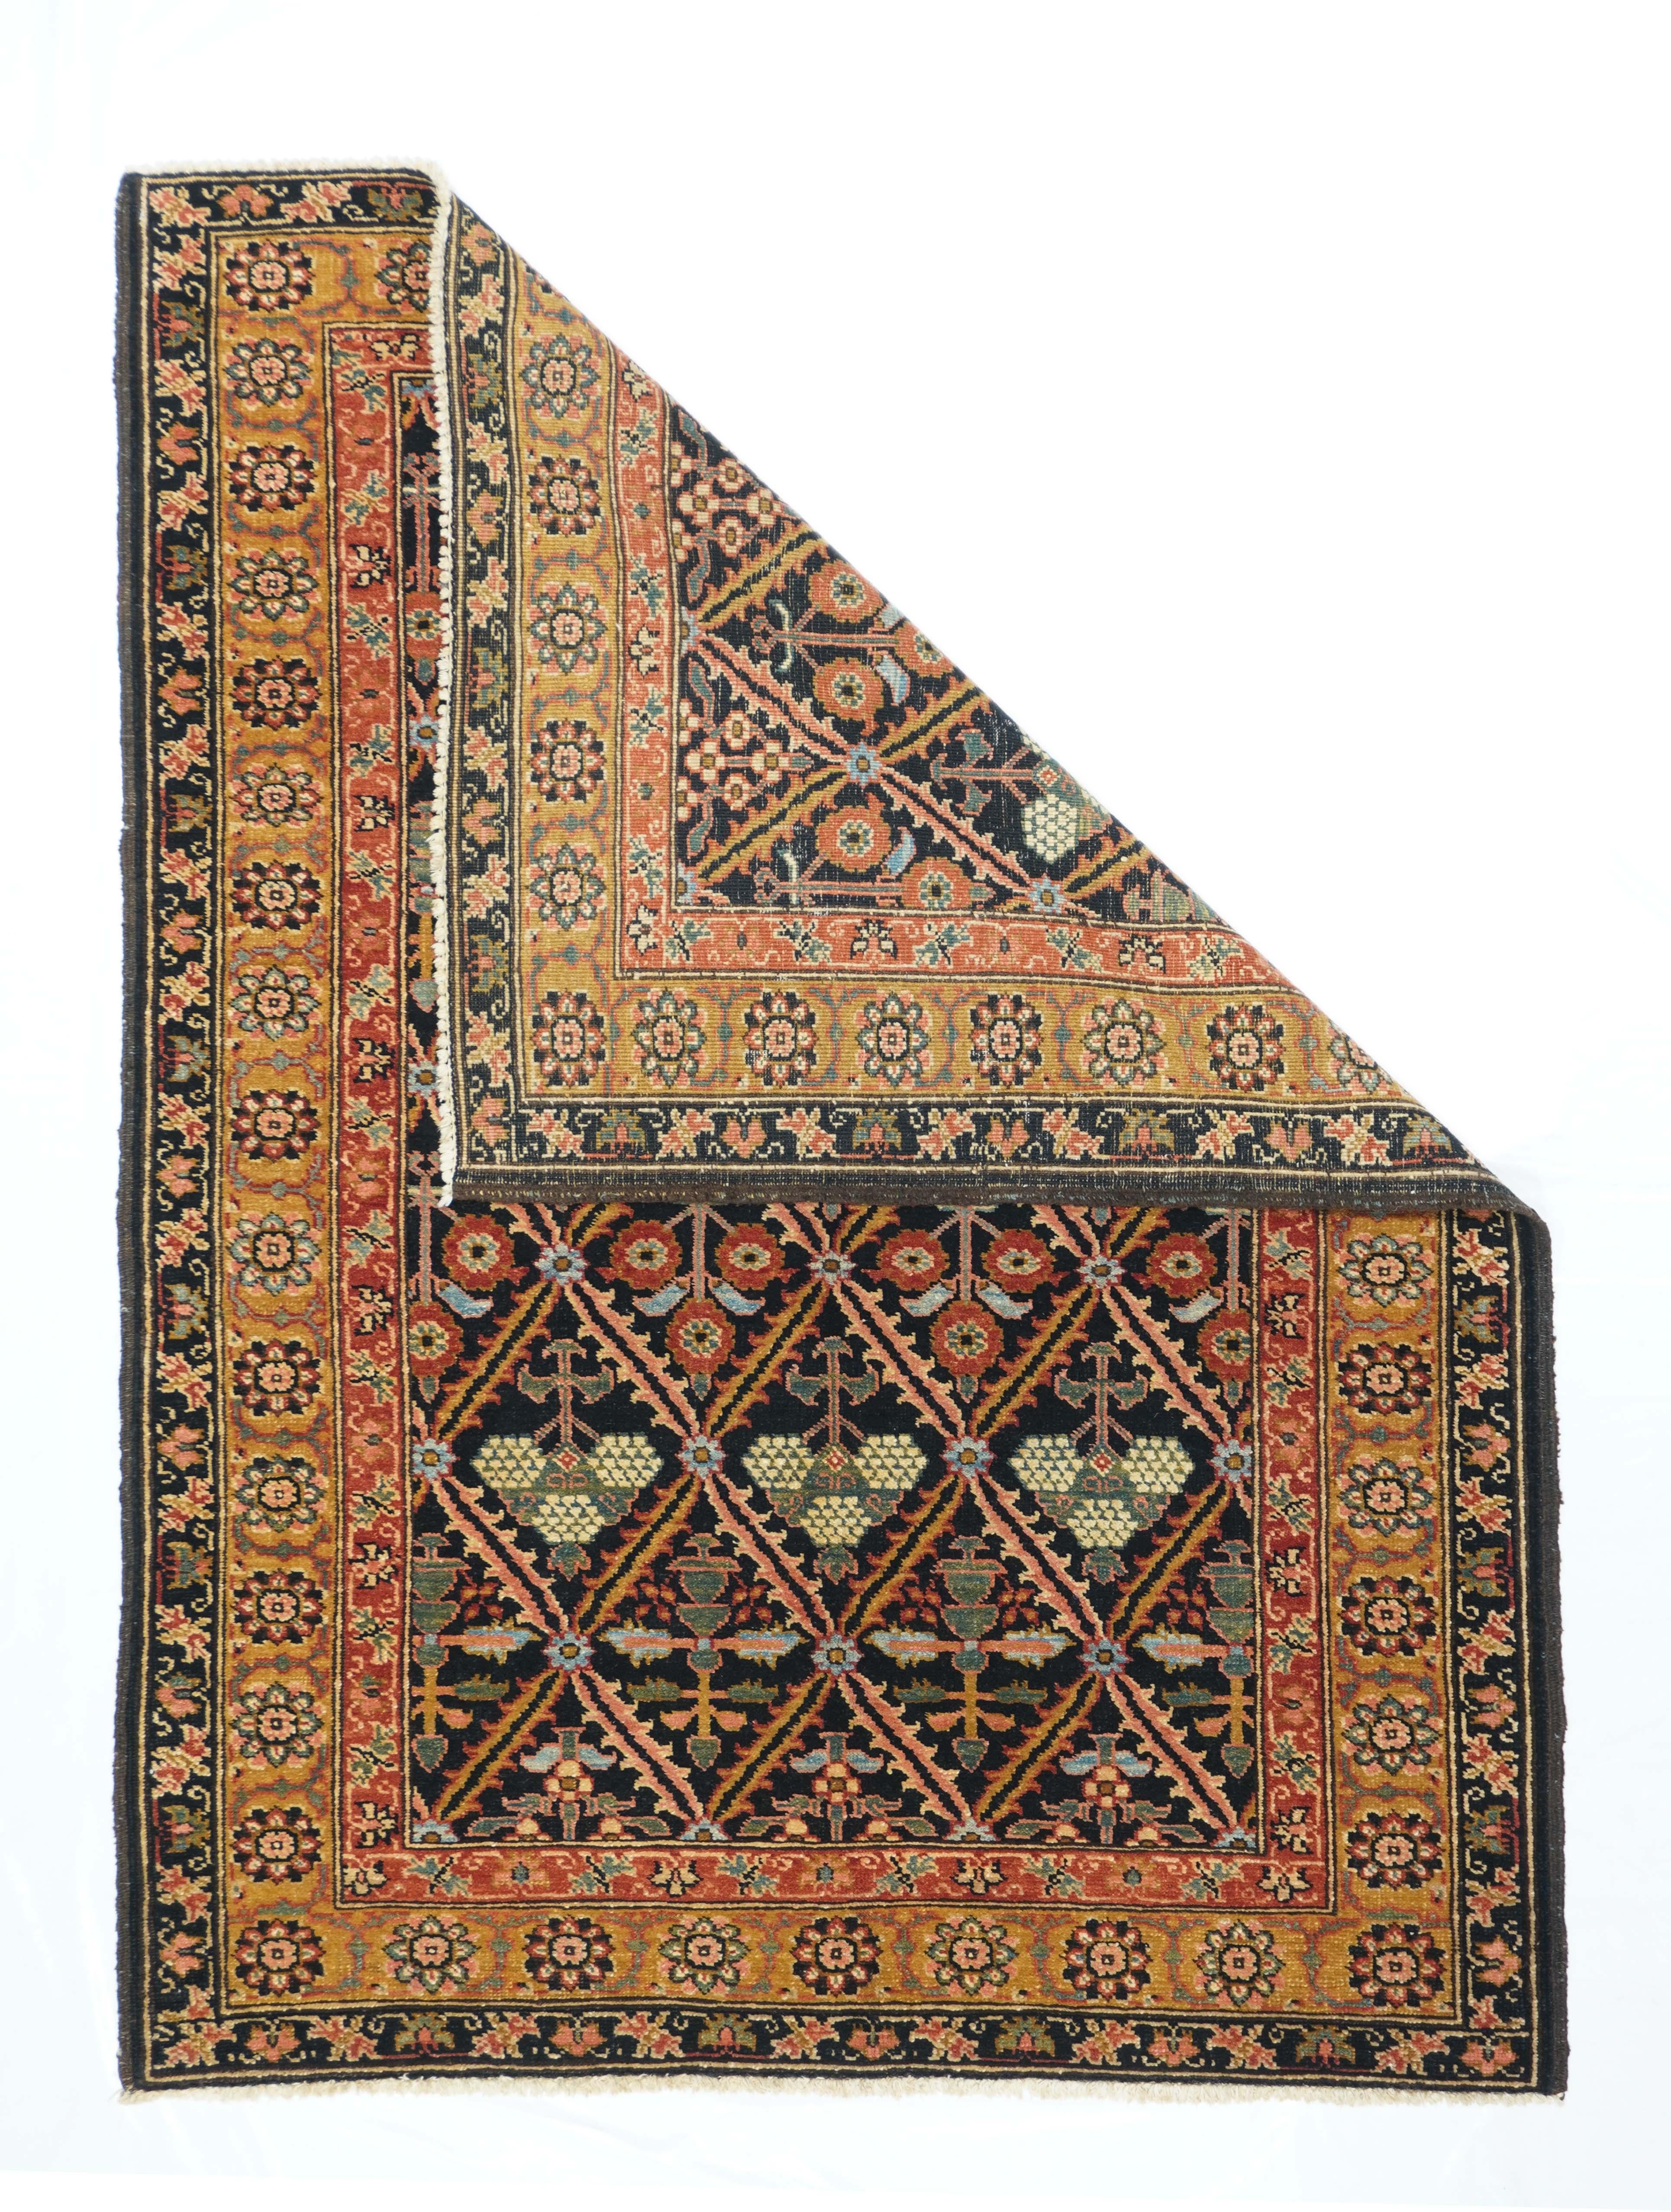 Bakhshaish rug¬†4'1'' x 5'10''. This antique rustic NW Persian scatter presents a deep blue serrated leaf lozenge lattice enclosing four distinct row styles of flowers including poppies and prunus. Straw-gold rosette border. Excellent field balance.